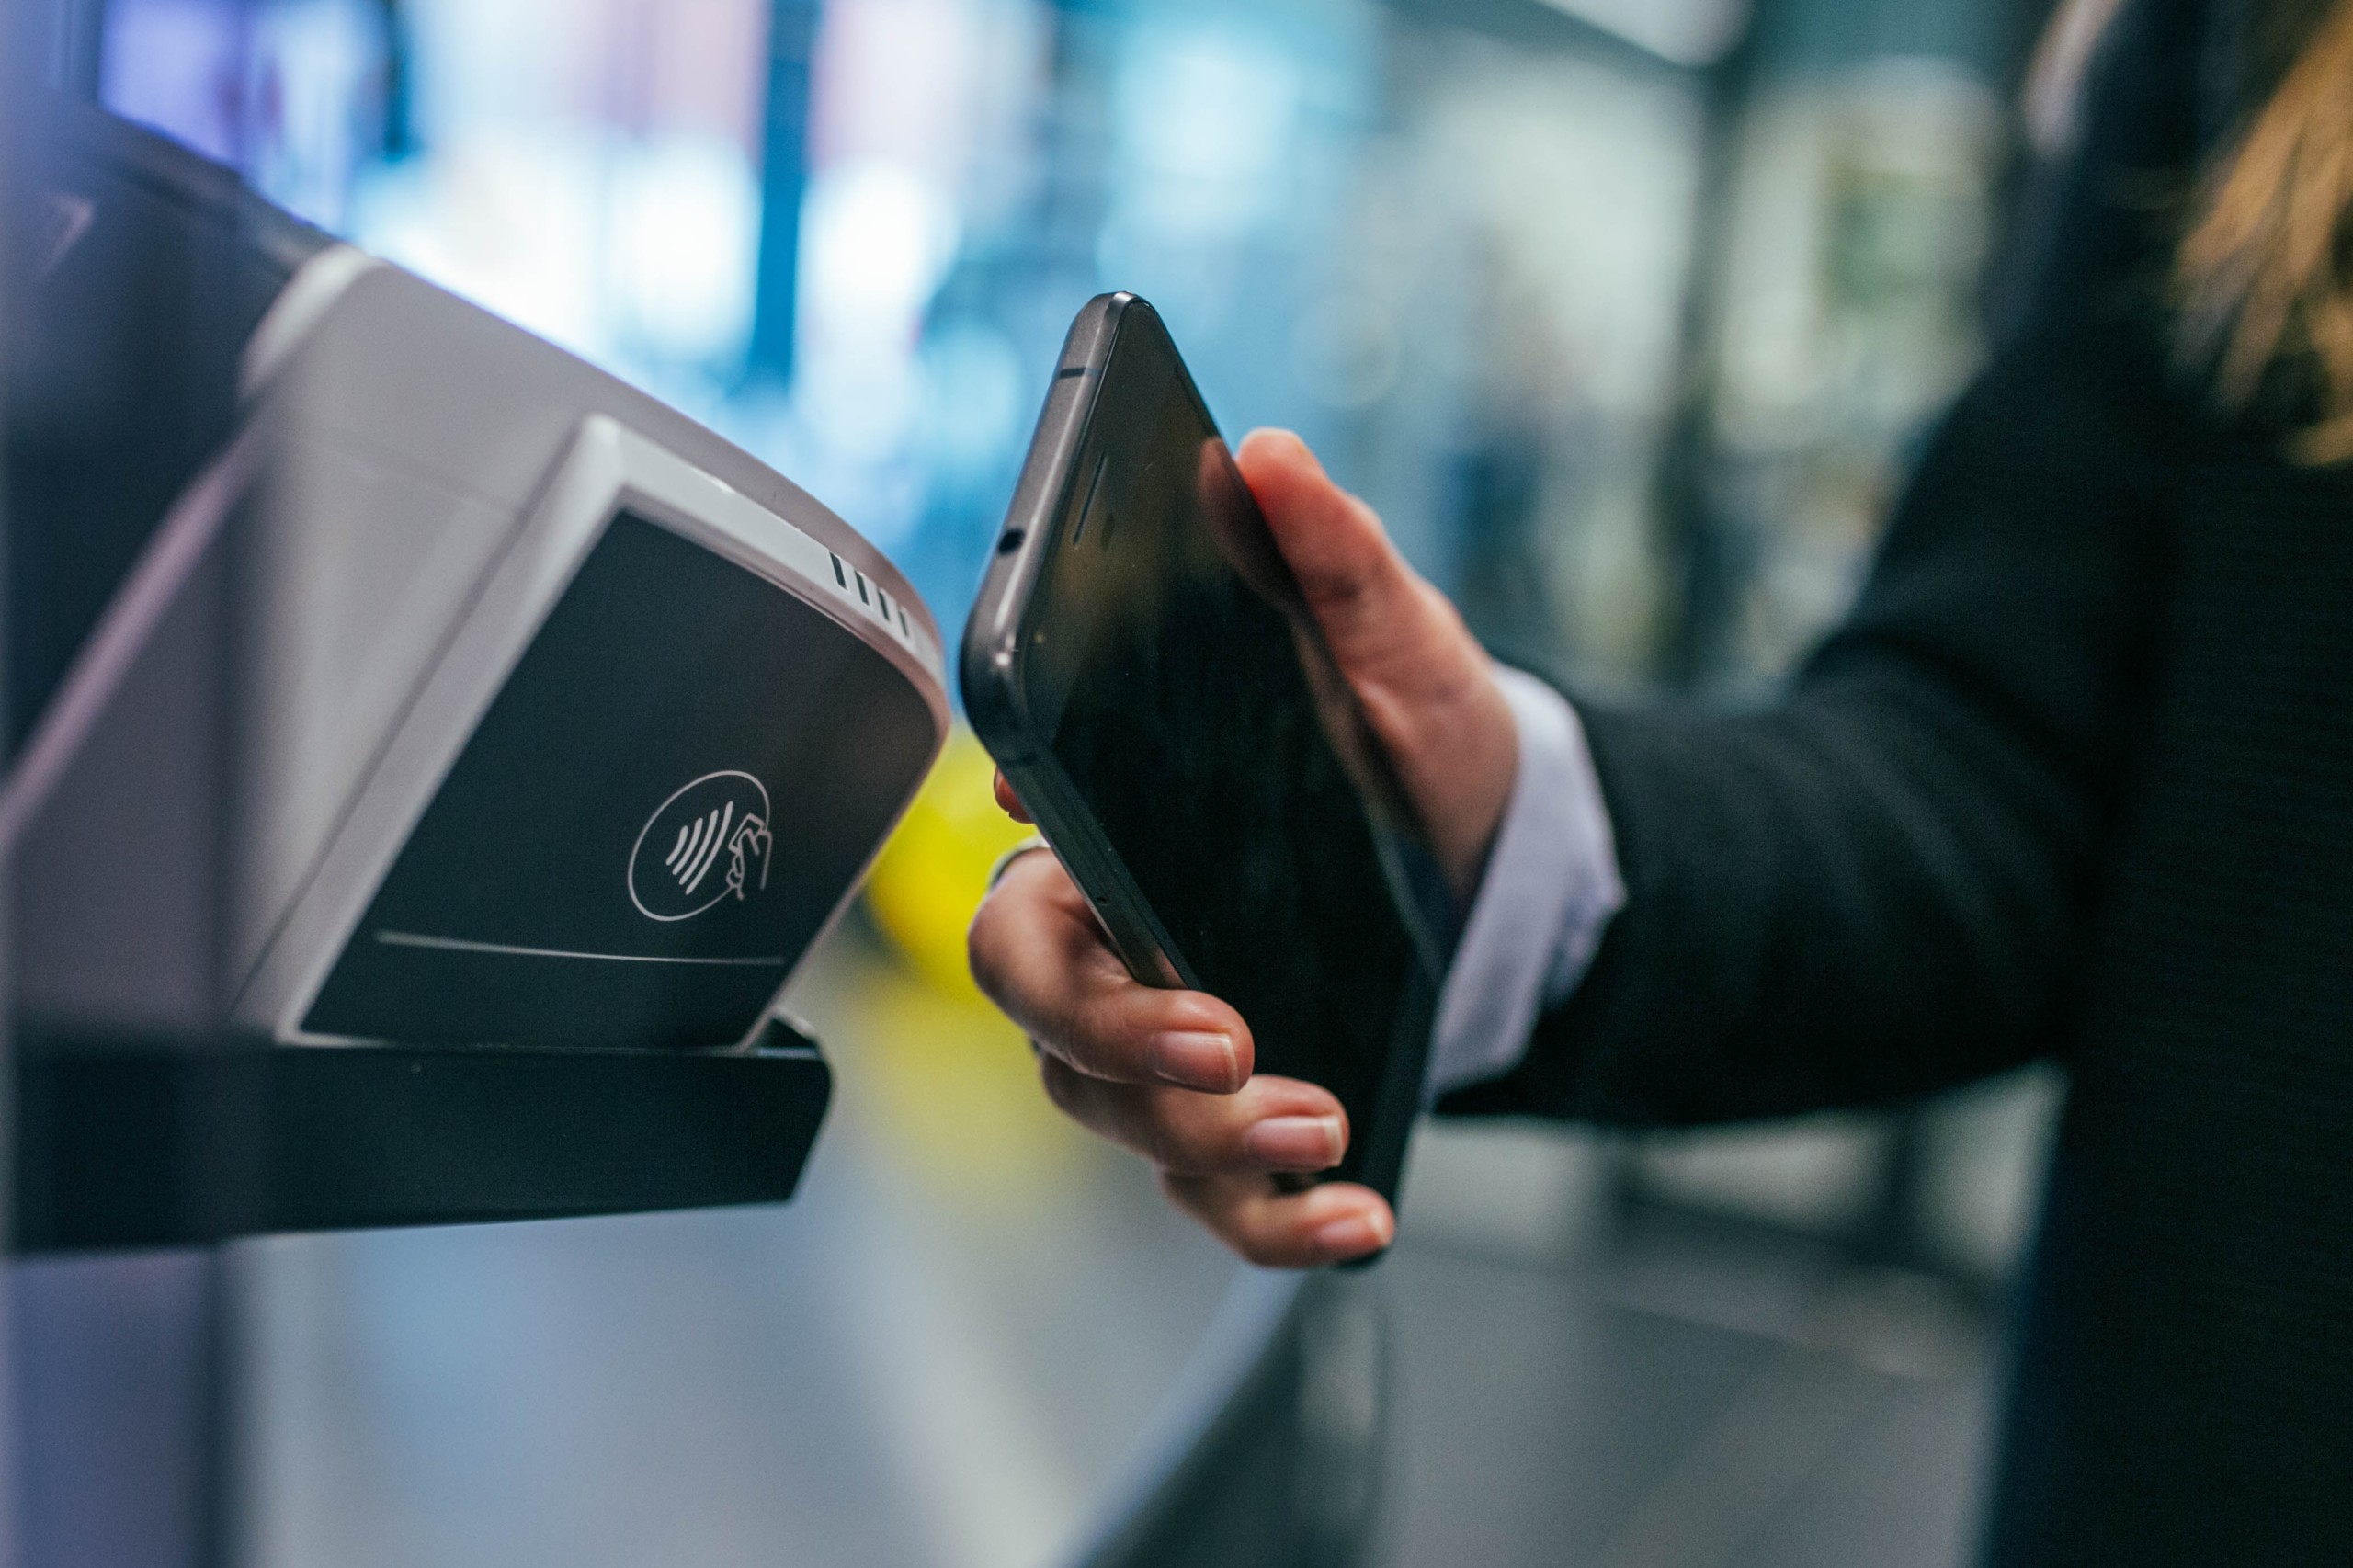 Mobile Payment using Payment Terminal. Financial services.